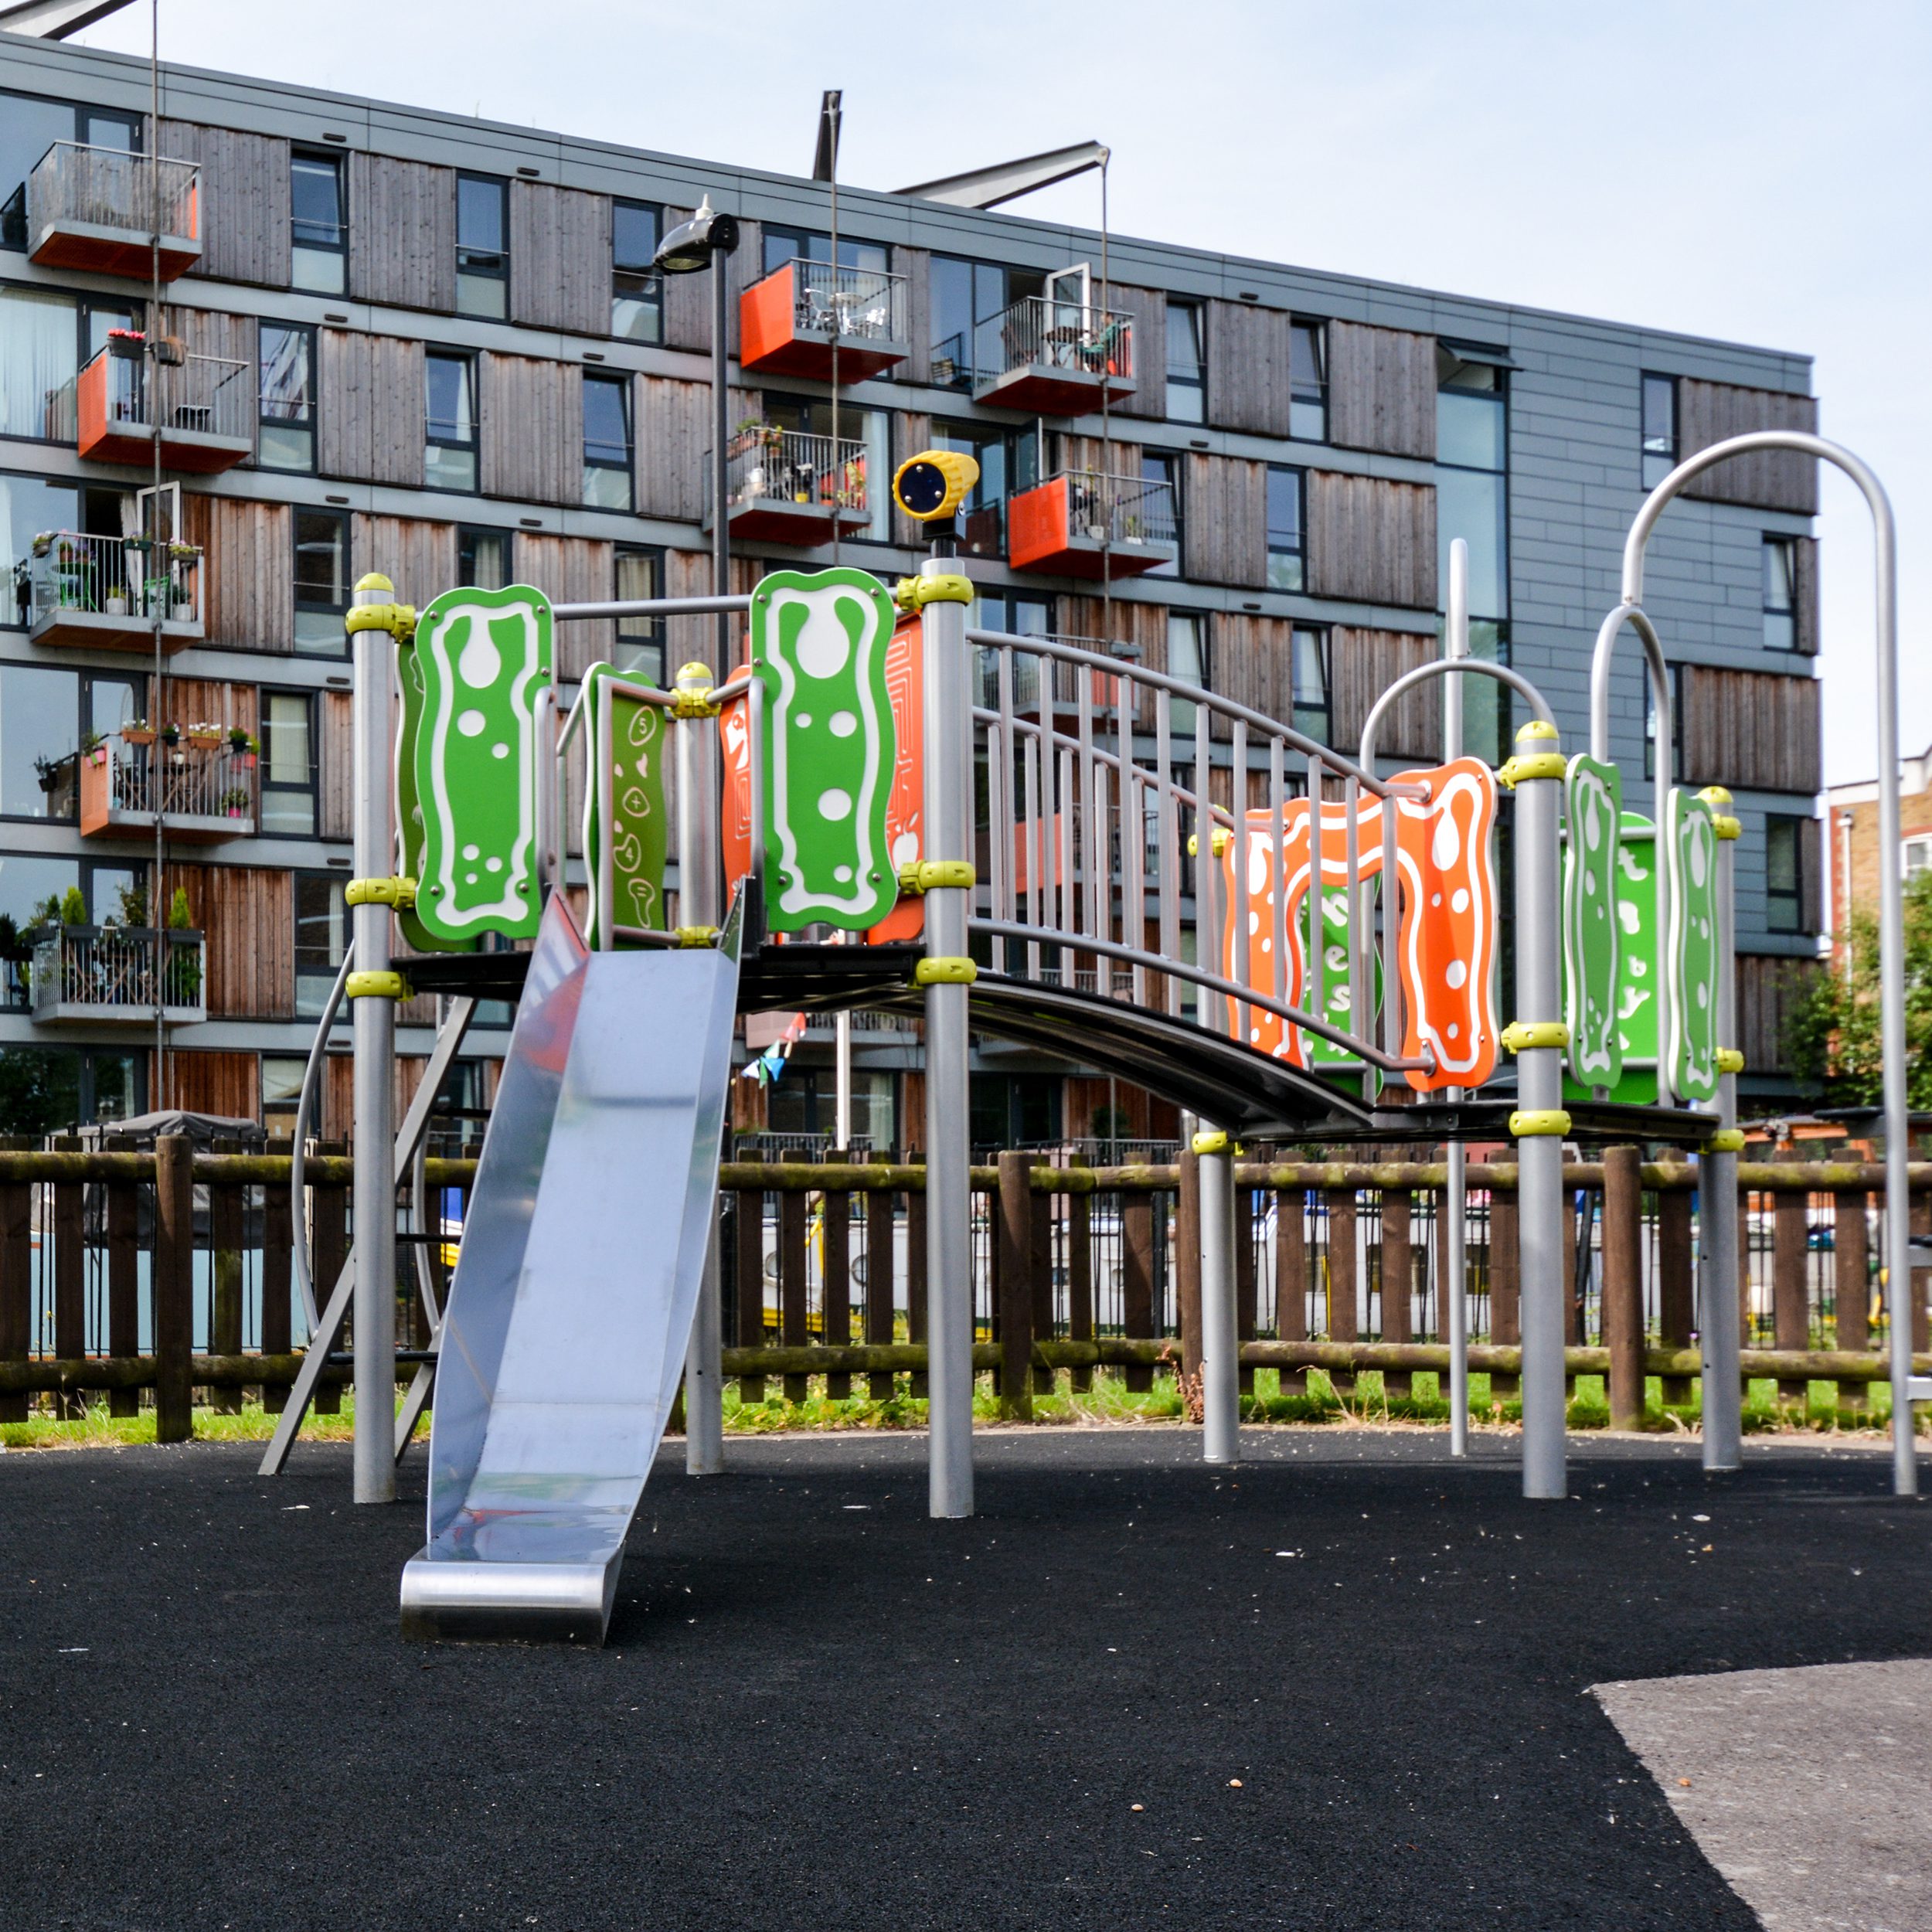 Play area in front of residential properties in hackney council